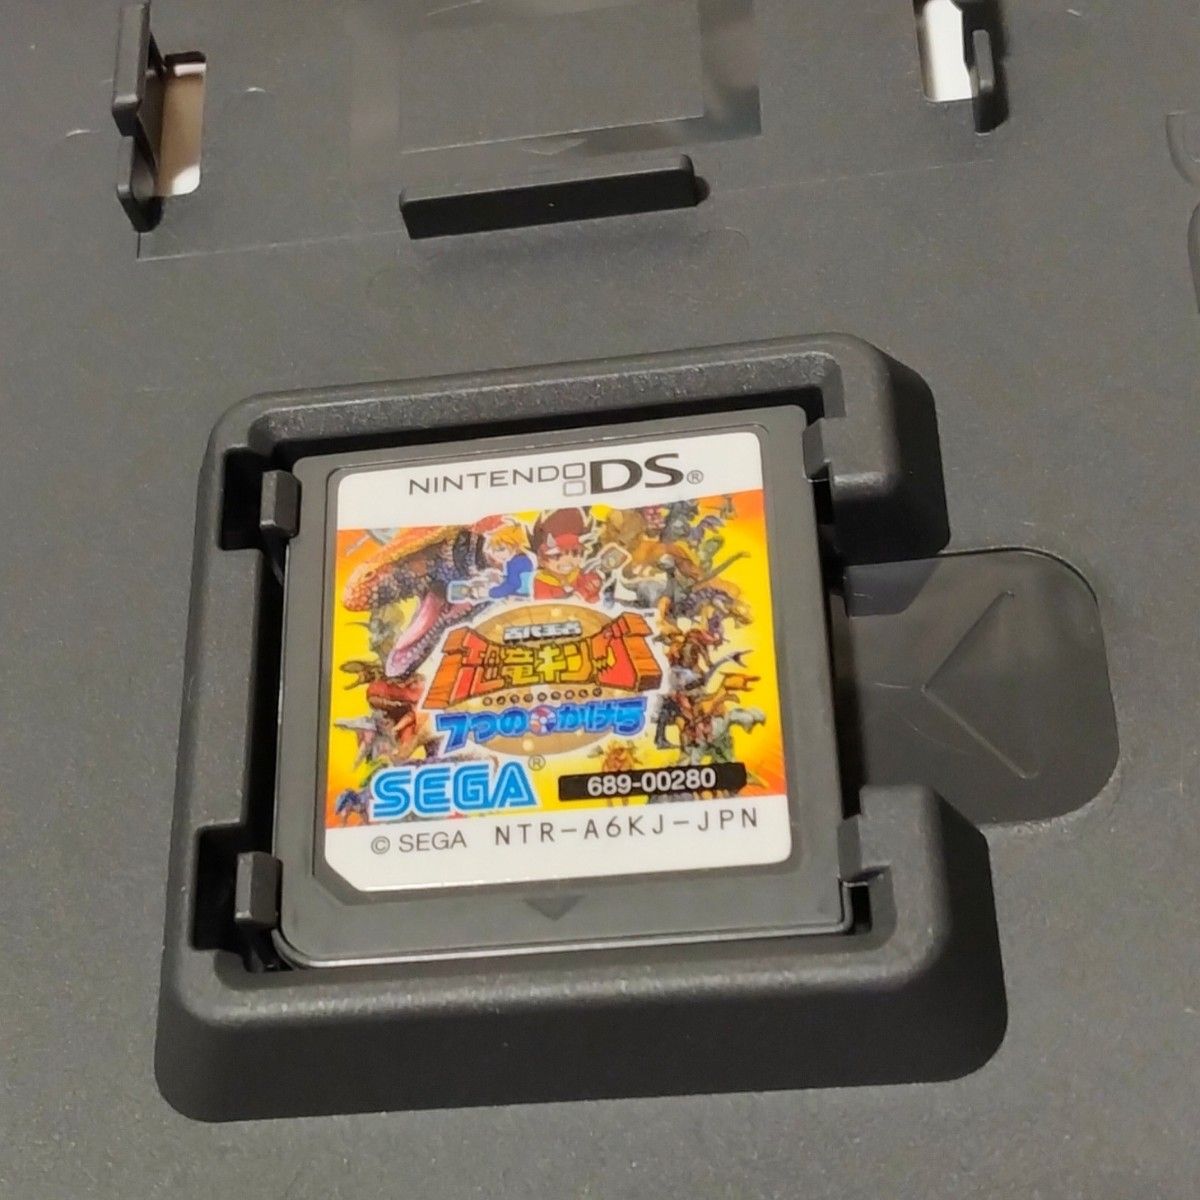 【DS】 古代王者 恐竜キング 7つのかけら ソフト＆攻略本セット Nintendo DS